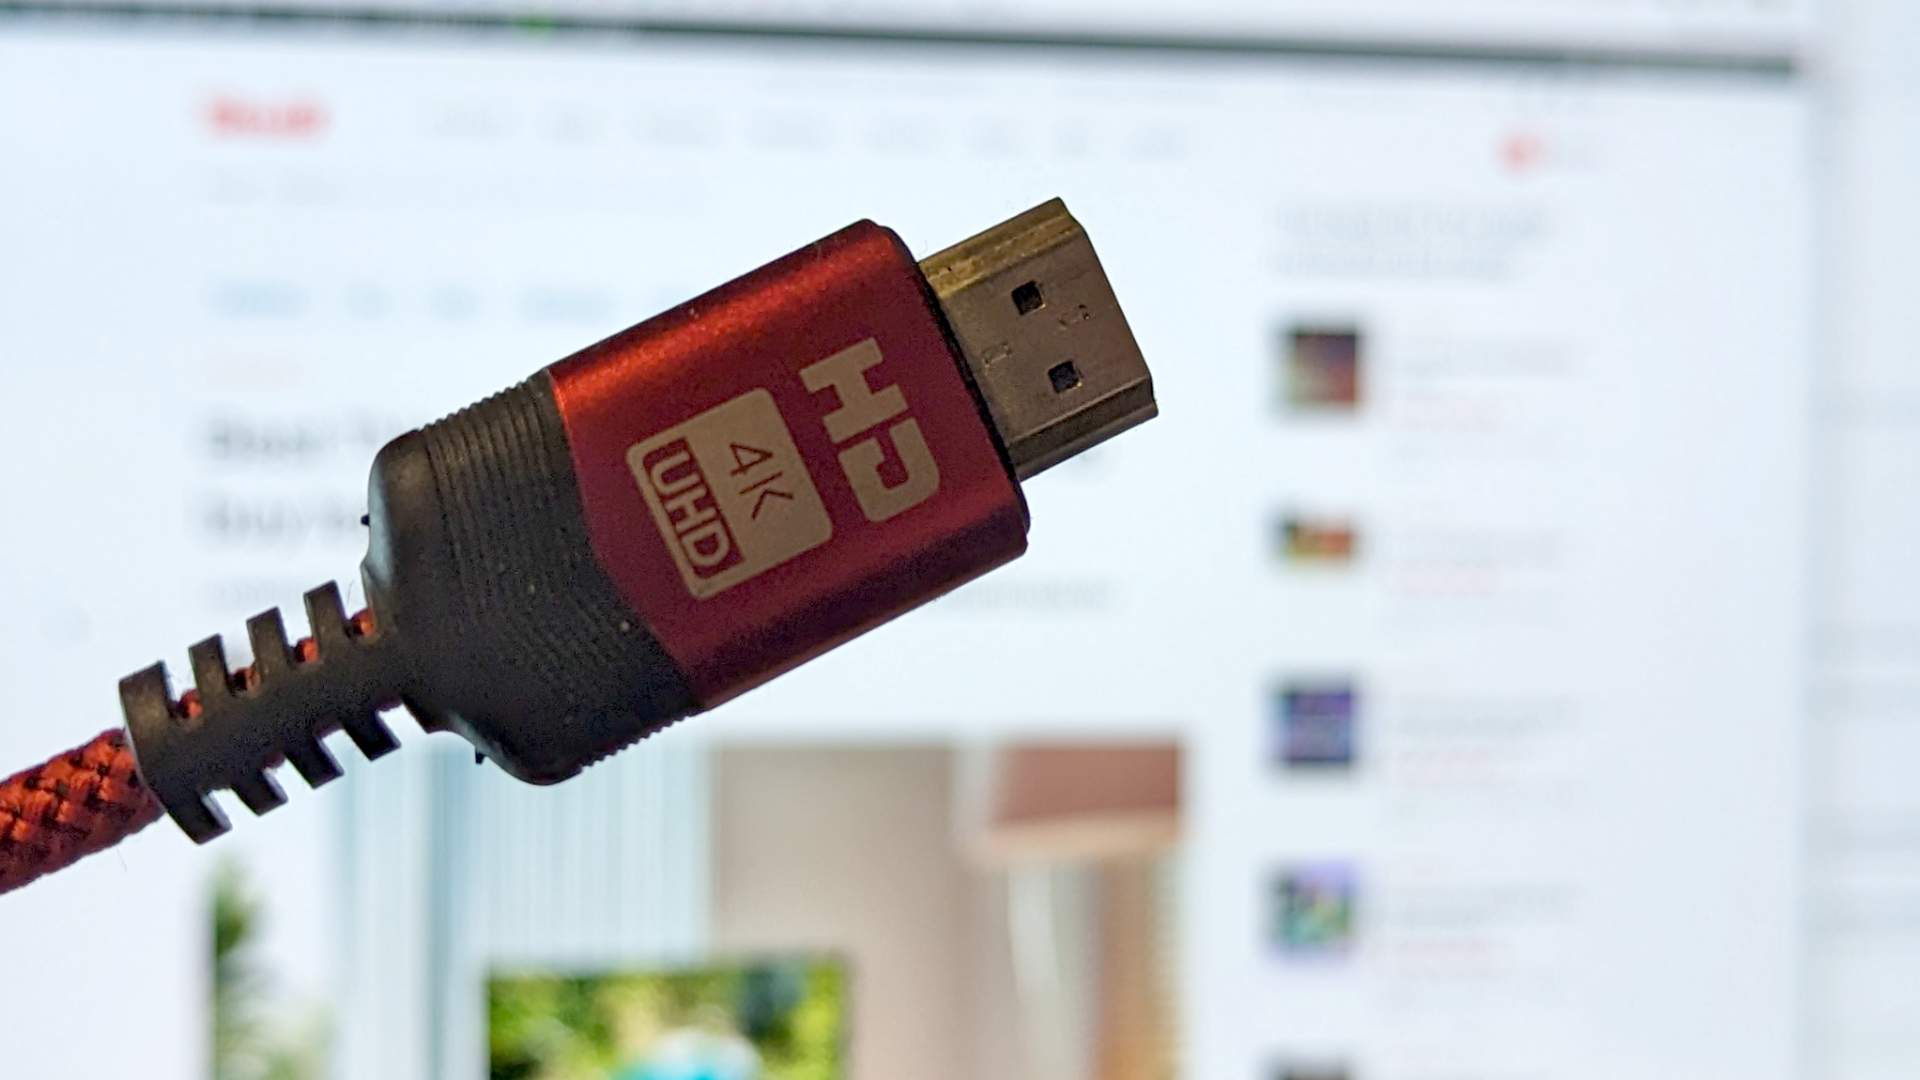 What Does HDMI Stand for? Here's How HDMI Works